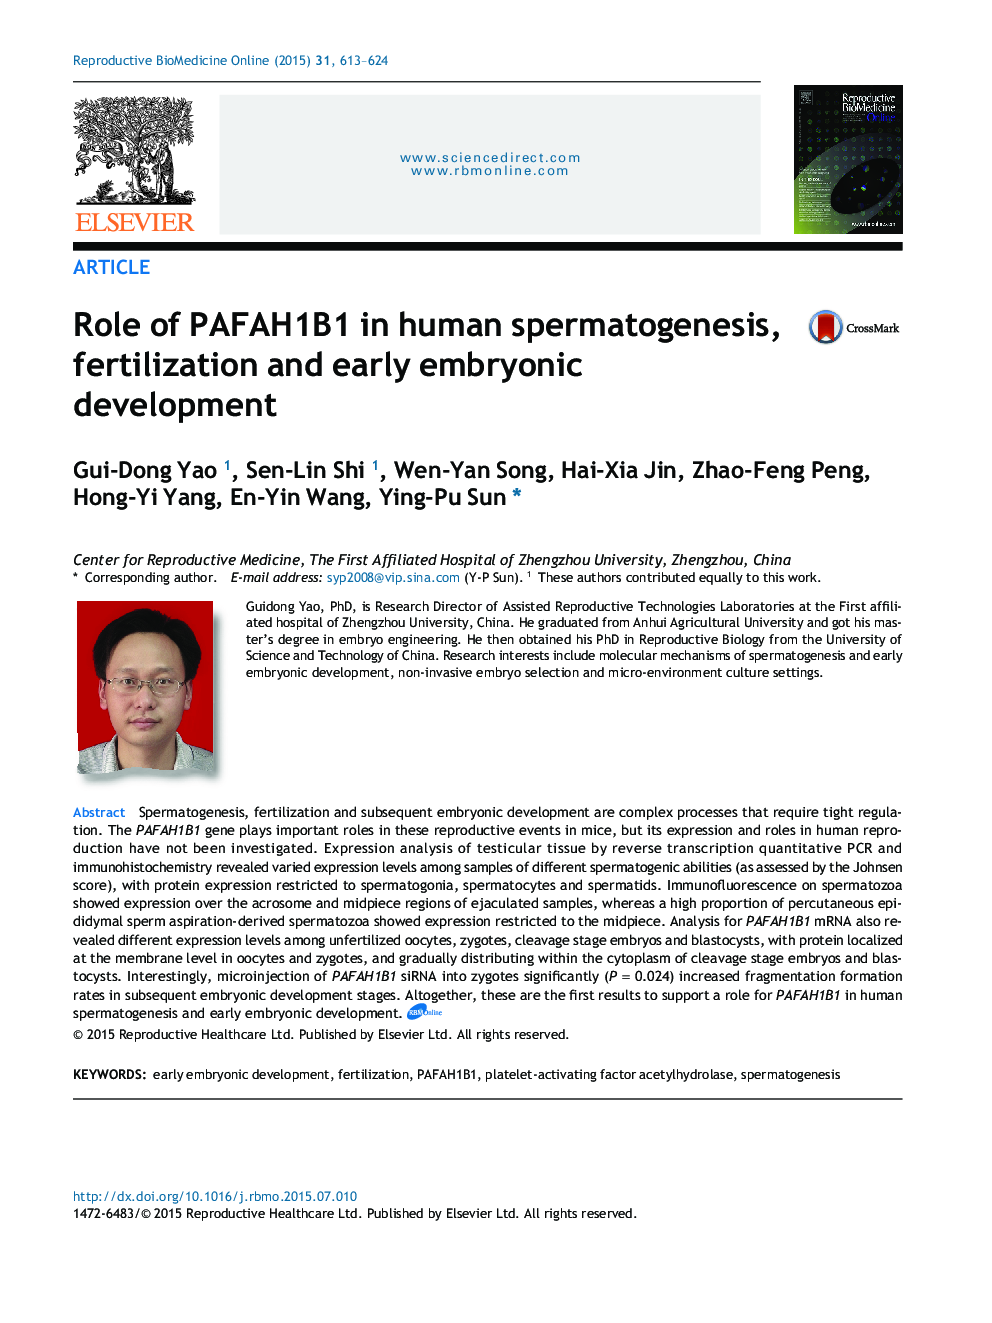 Role of PAFAH1B1 in human spermatogenesis, fertilization and early embryonic development